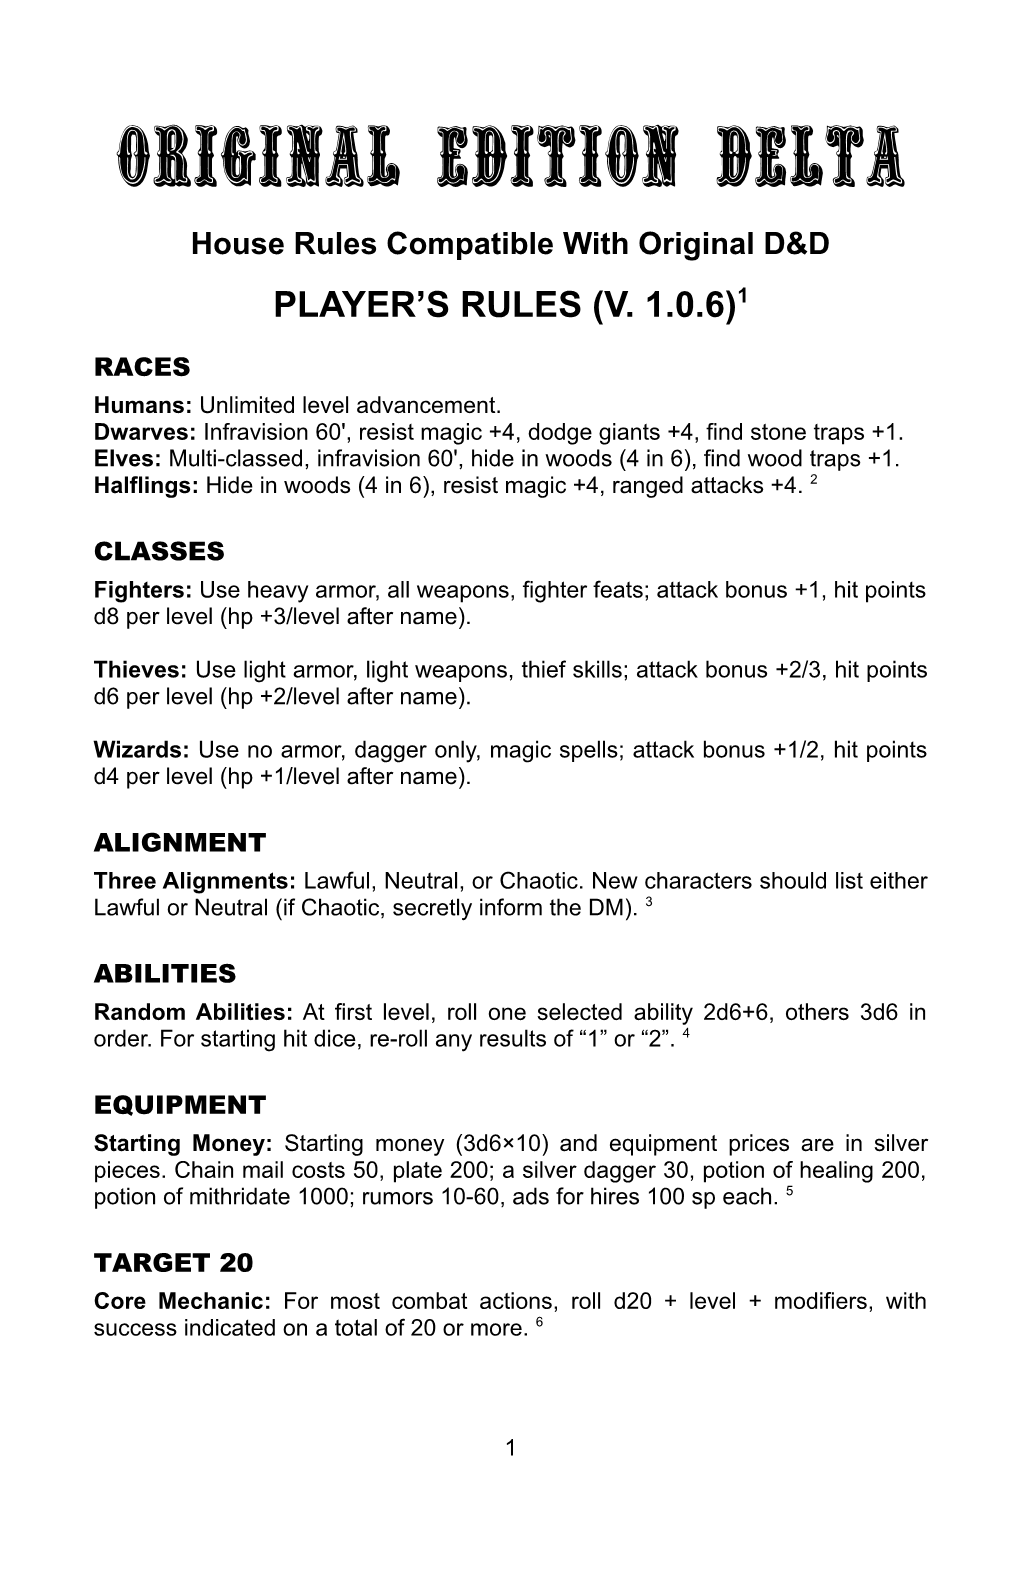 OED Player's Rules